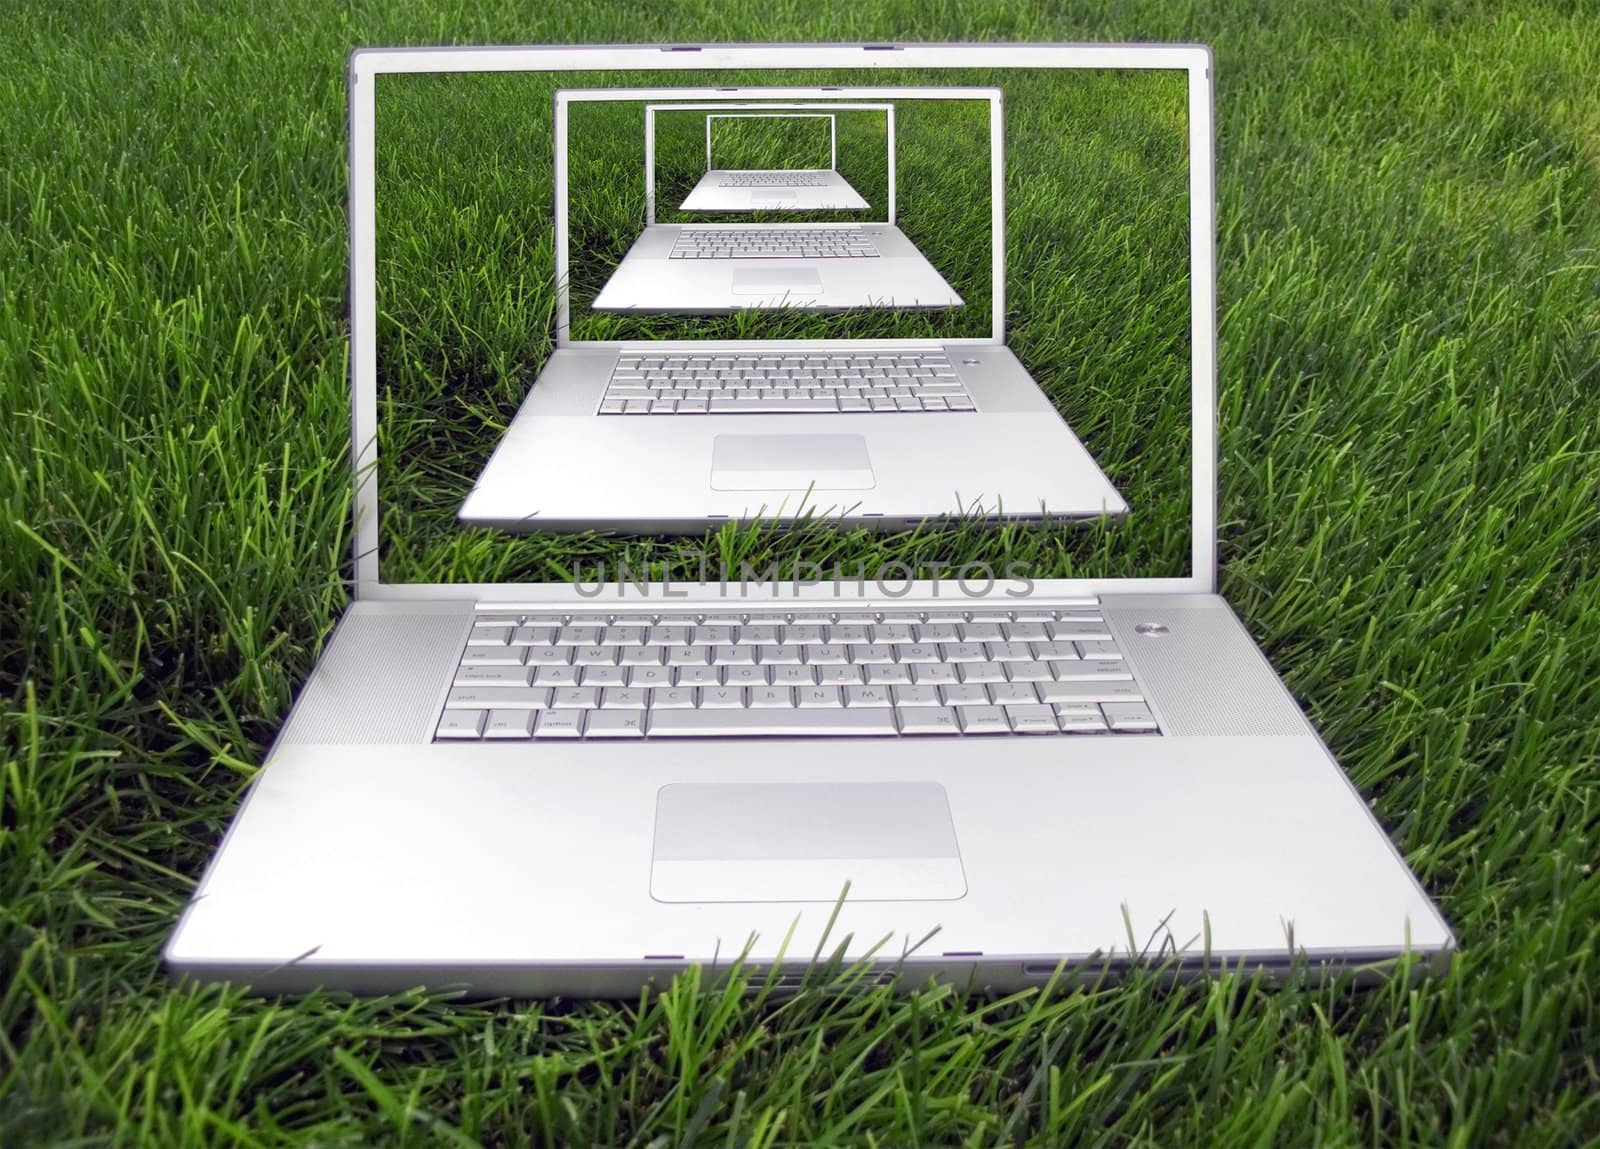 concept laptops in nature